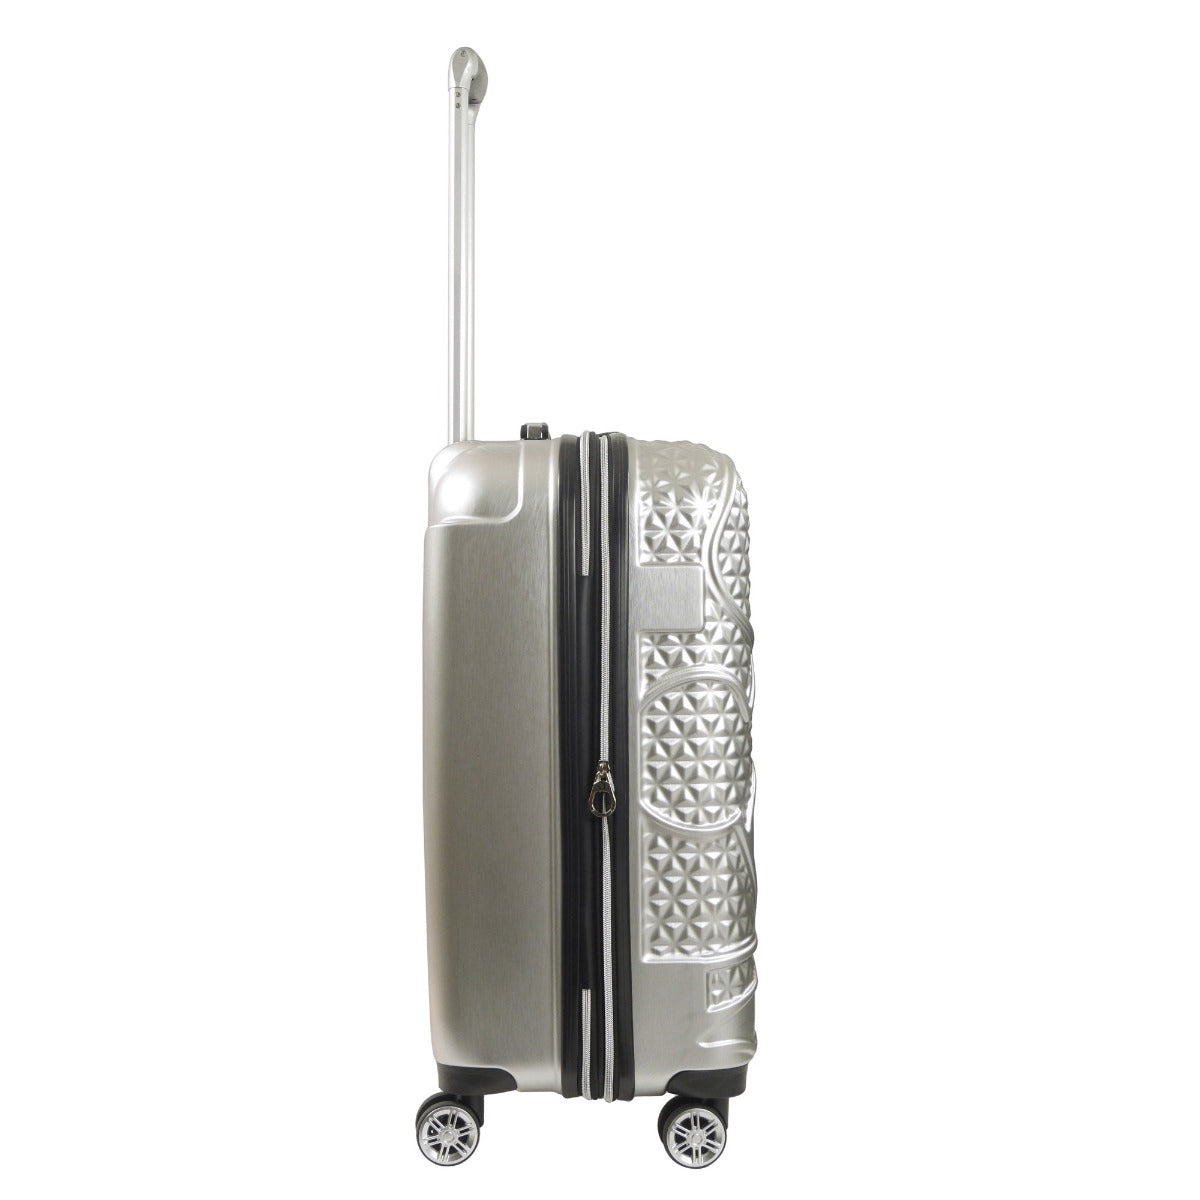 Adult Disney Luggage Mickey Mouse Texture Rolling Hard Sided Silver 26"